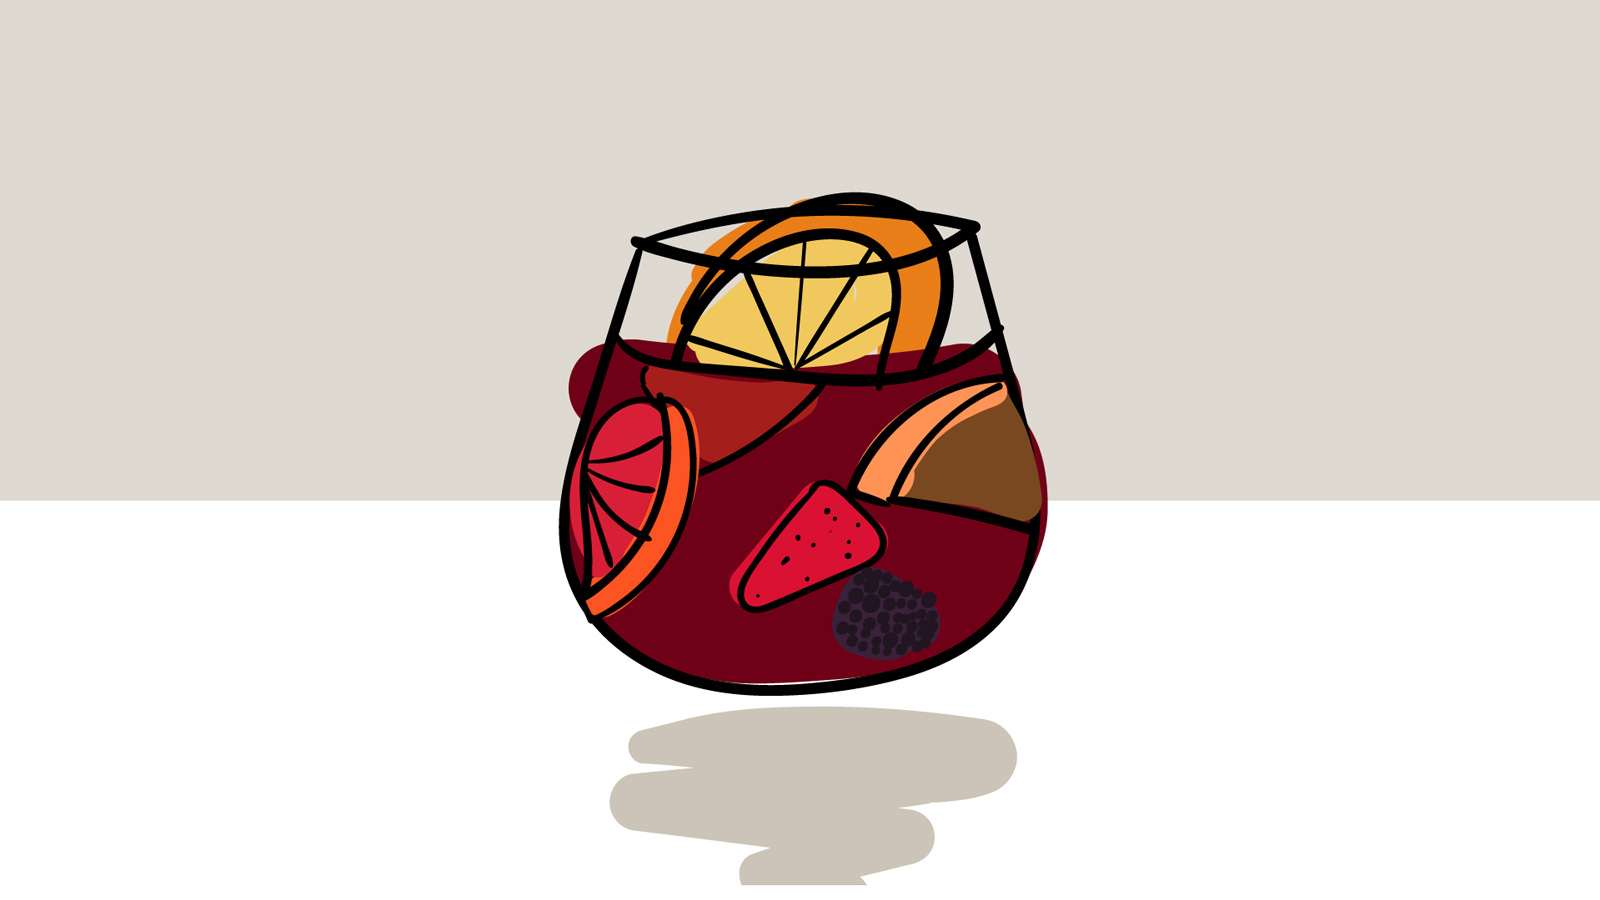 A Sangria cocktail that contains red wine, brandy, sugar and fruit elements